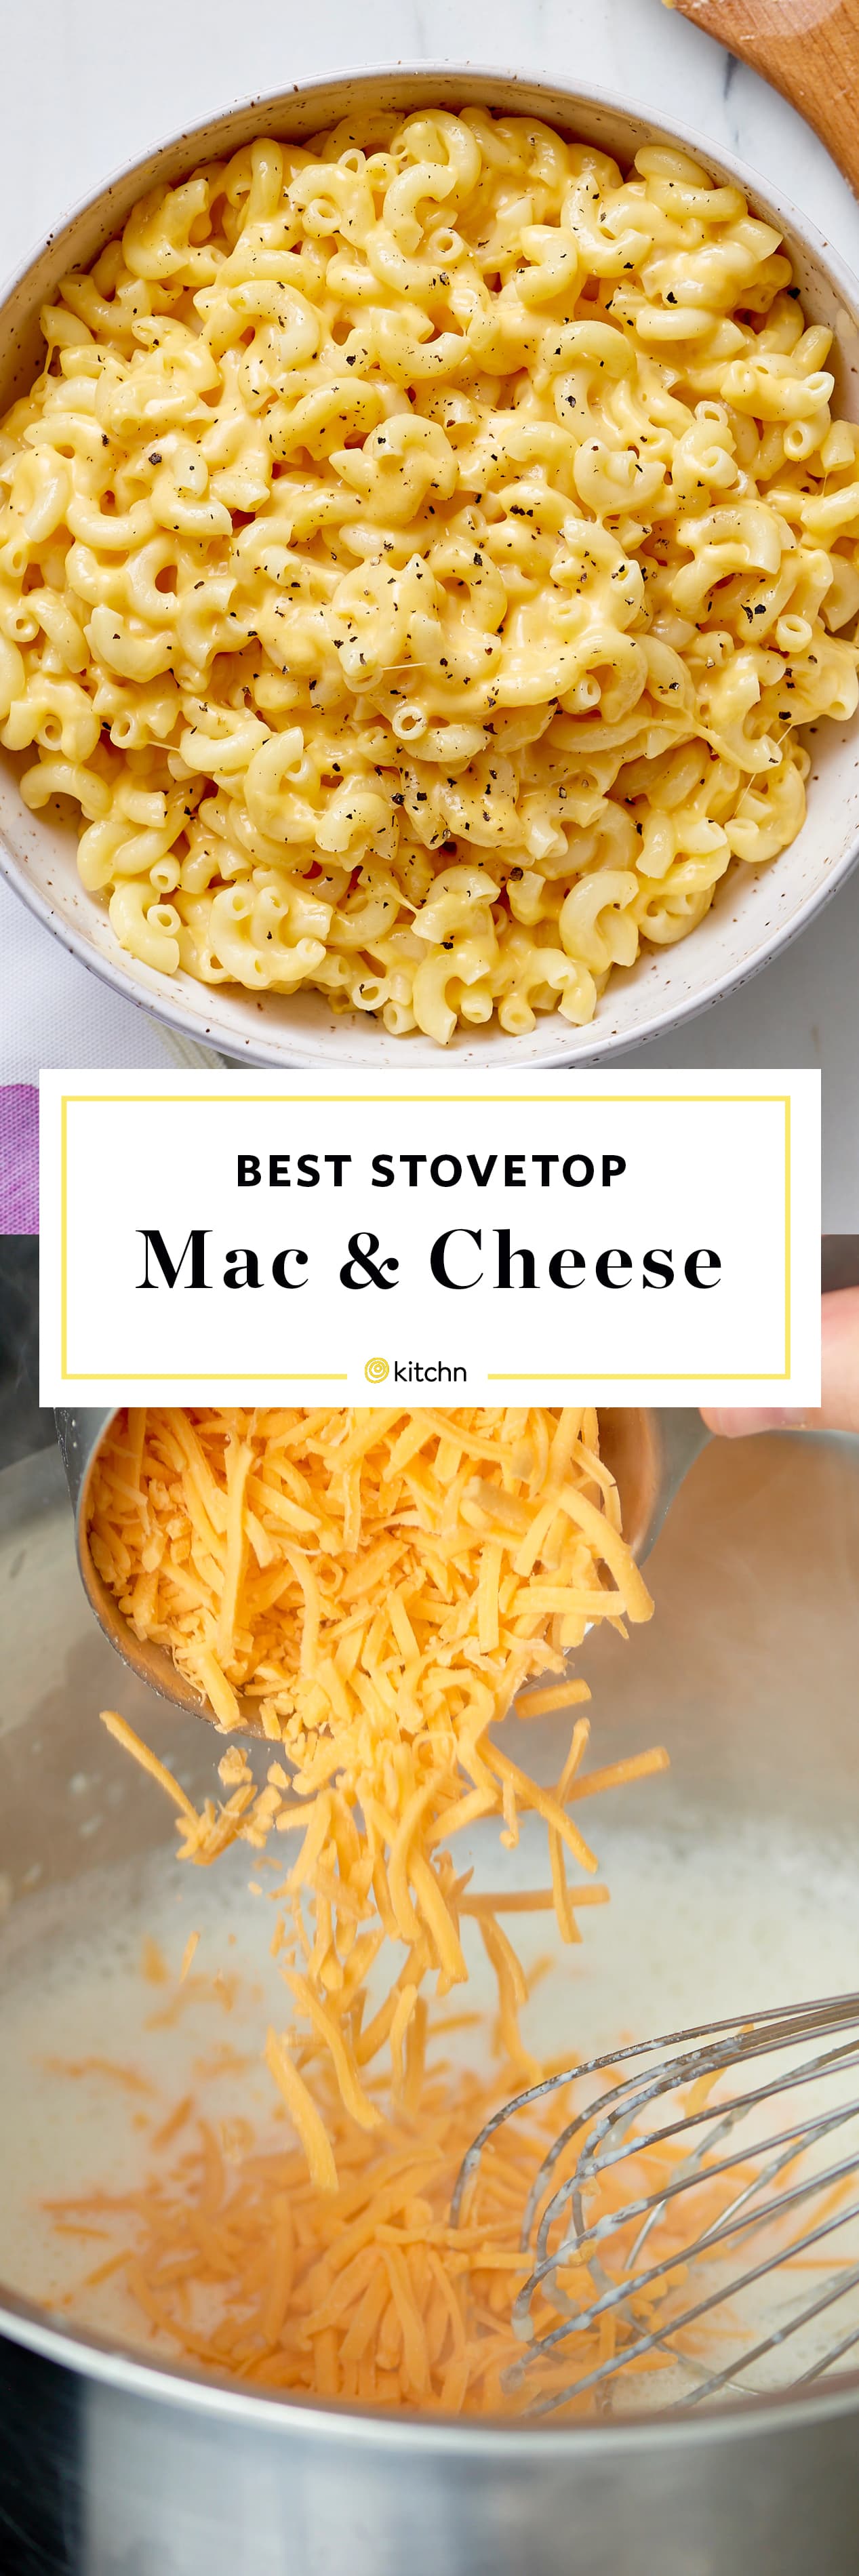 sharp or extra sharp cheese for macaroni and cheese